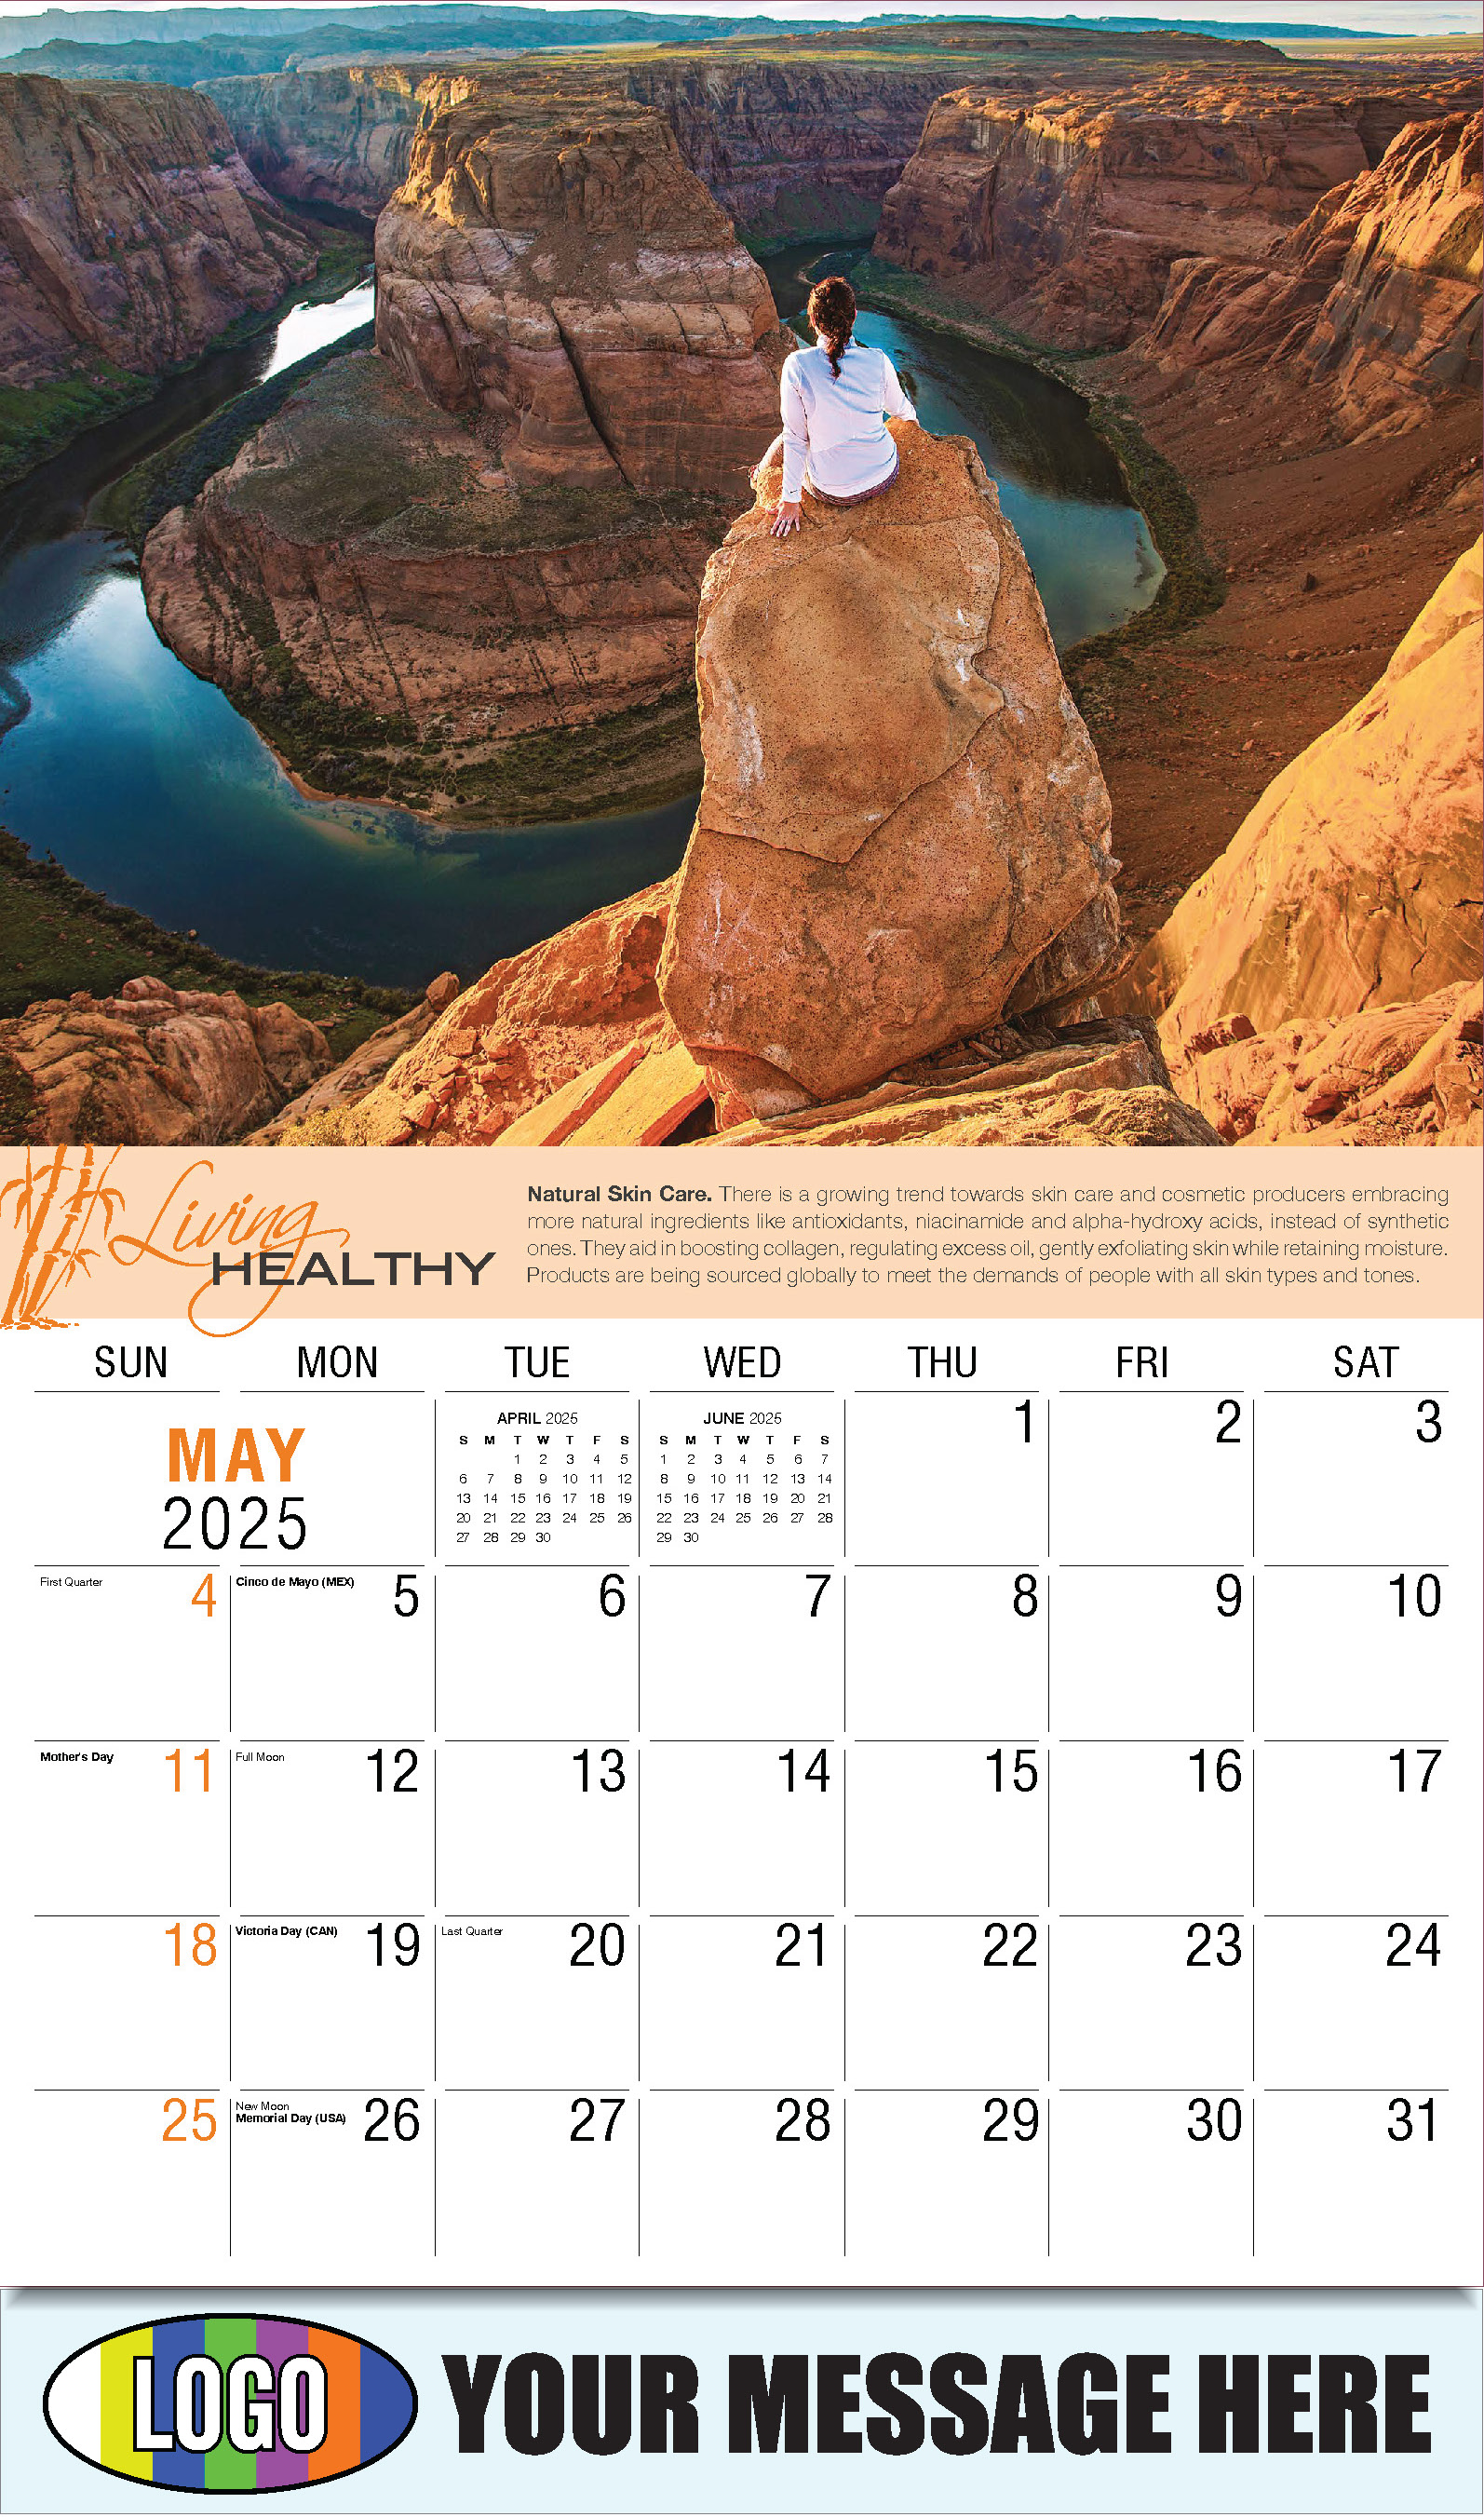 Living Healthy 2025 Business Promotional Calendar - May